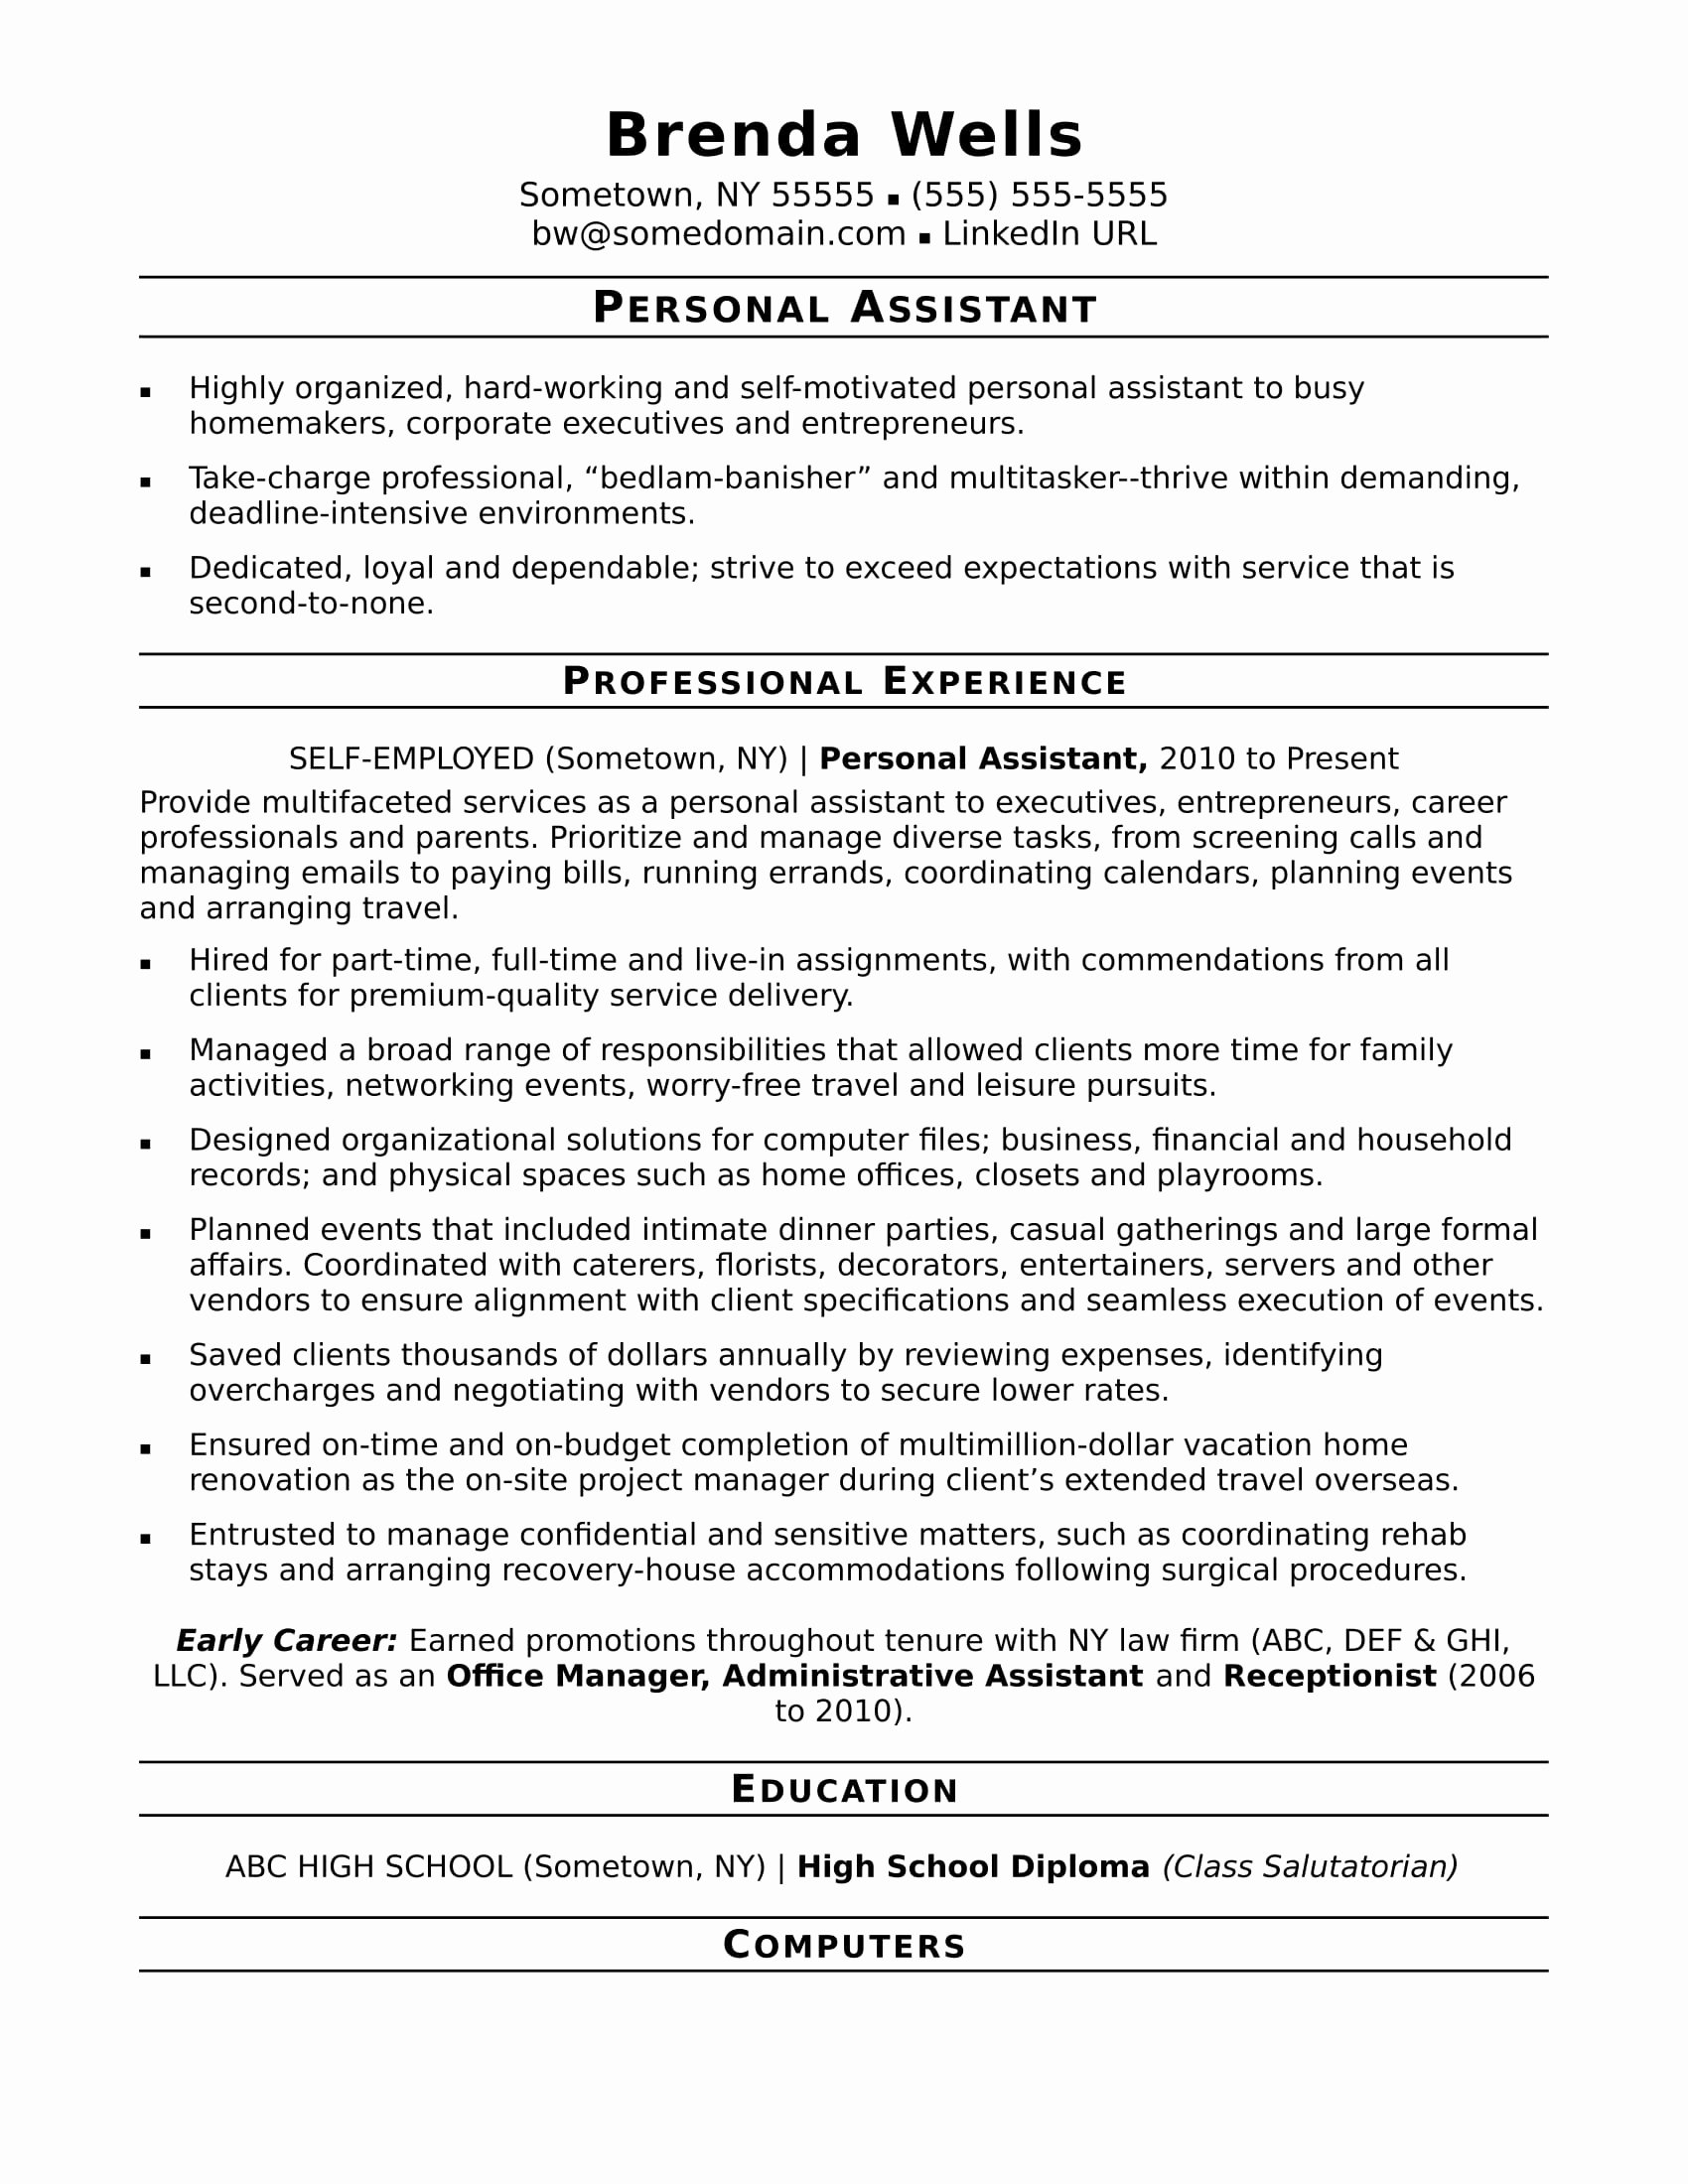 Personal assistant Resume Sample